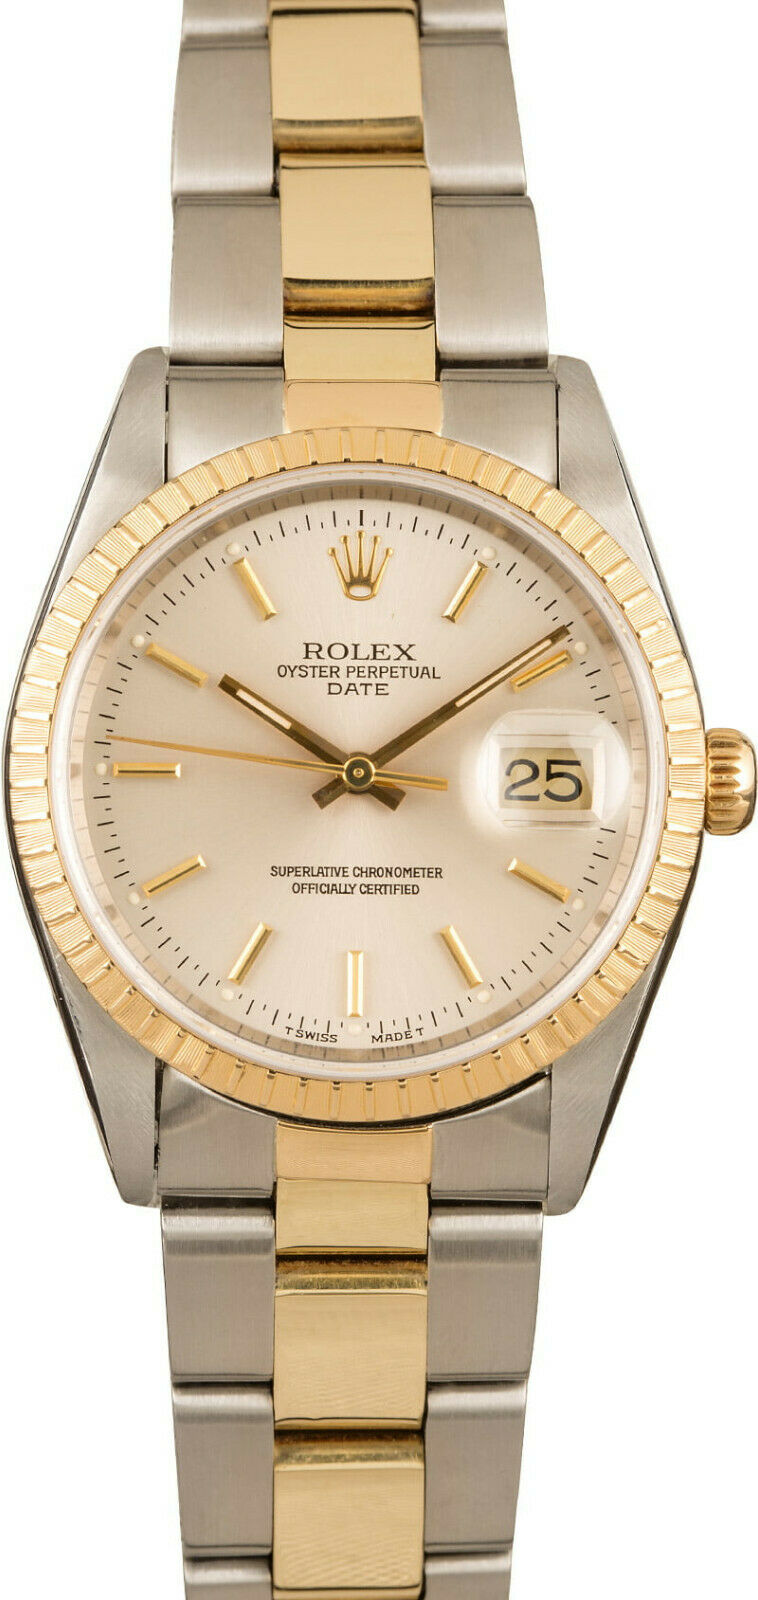 Rolex Date (15223) Price Guide and 